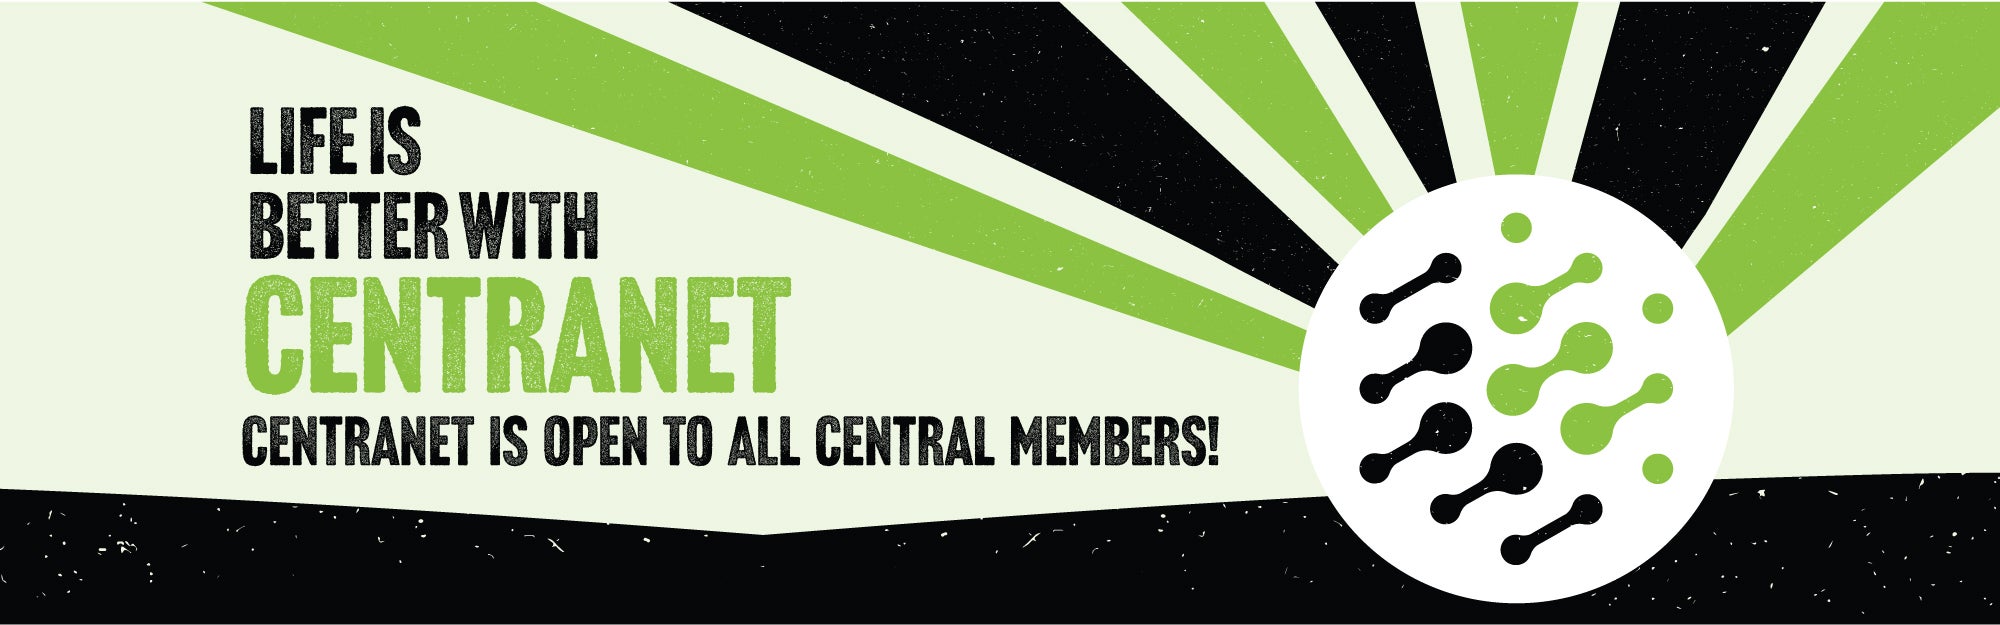 Life is Better with Centranet! Centranet is available to all Central members!